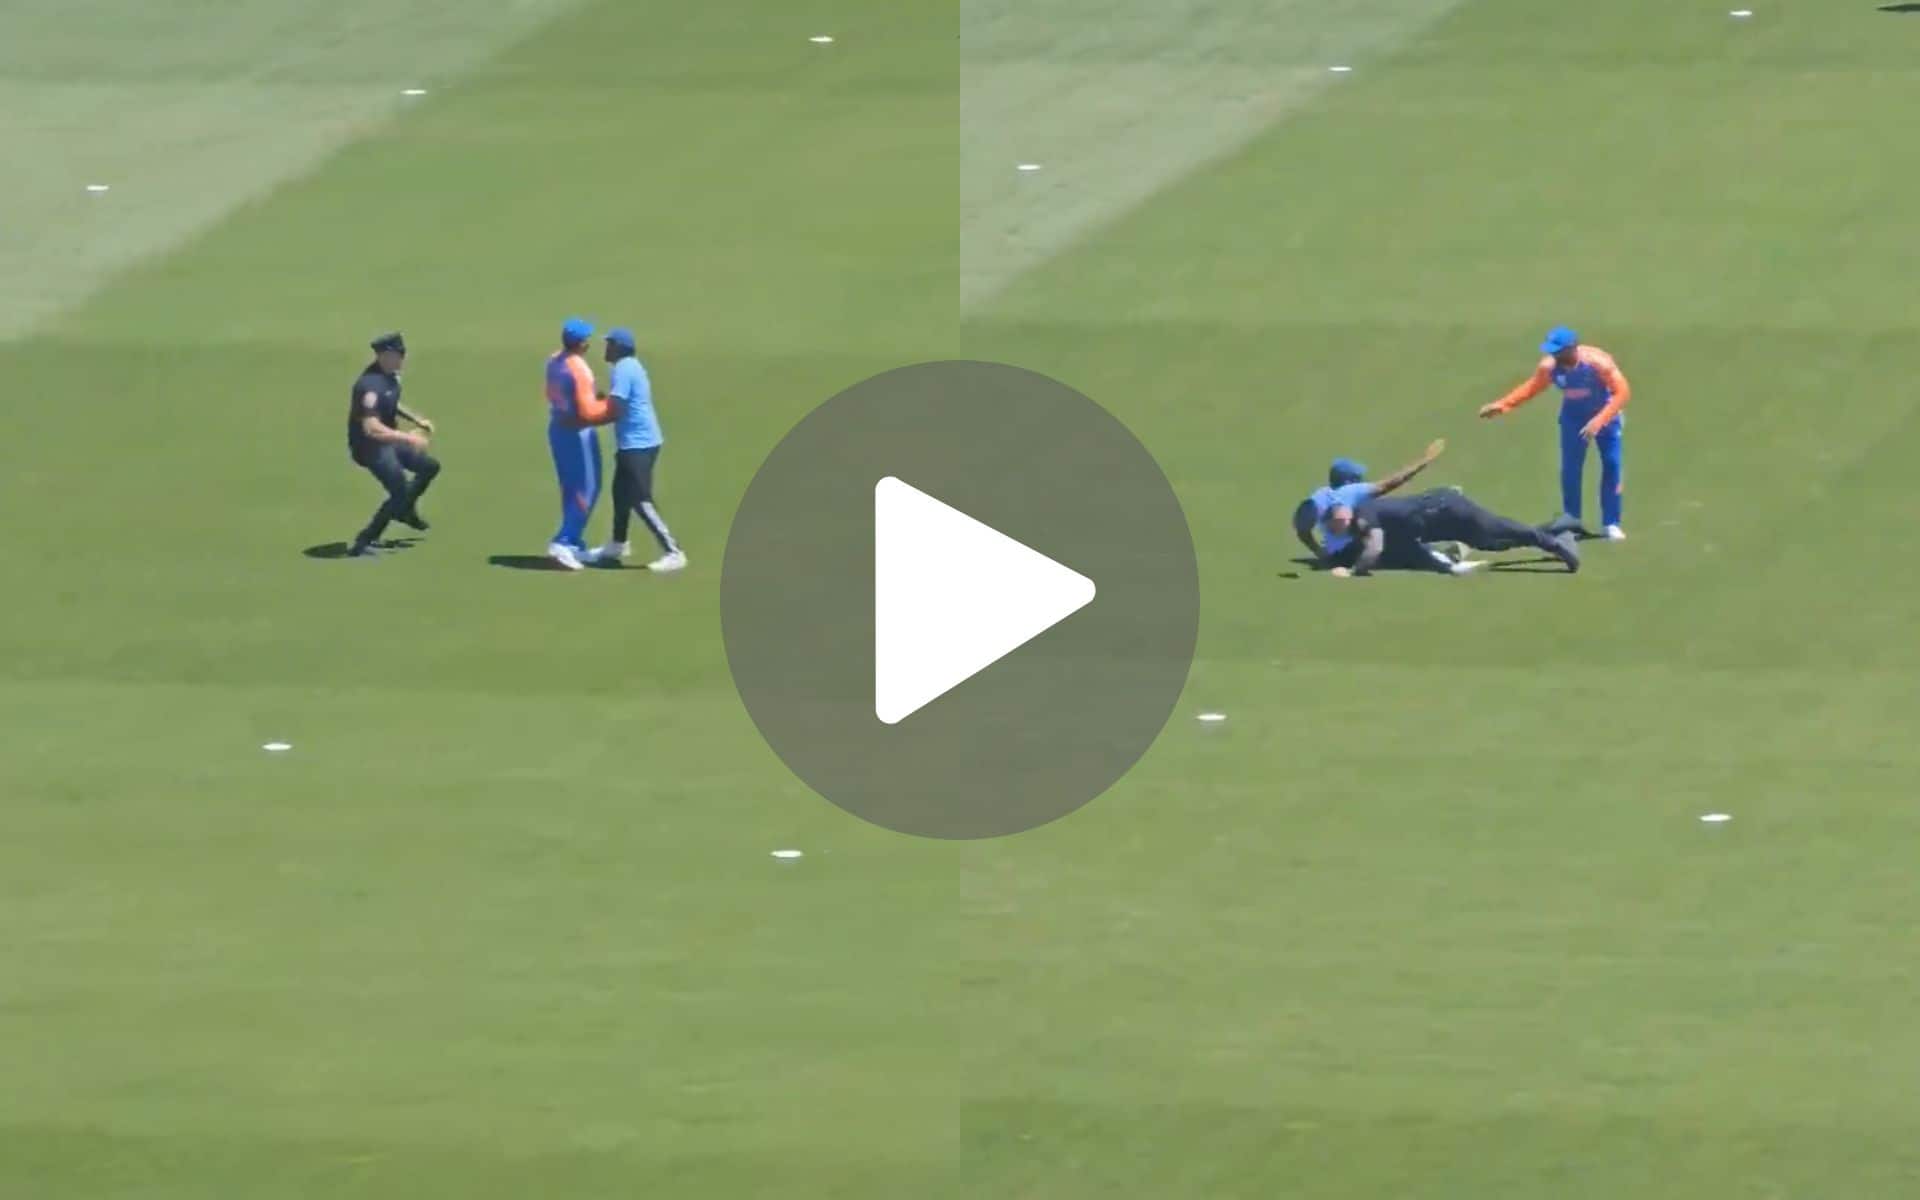 [Watch] Rohit Sharma Requests US Police To Go Easy With Pitch Invader During IND Vs BAN